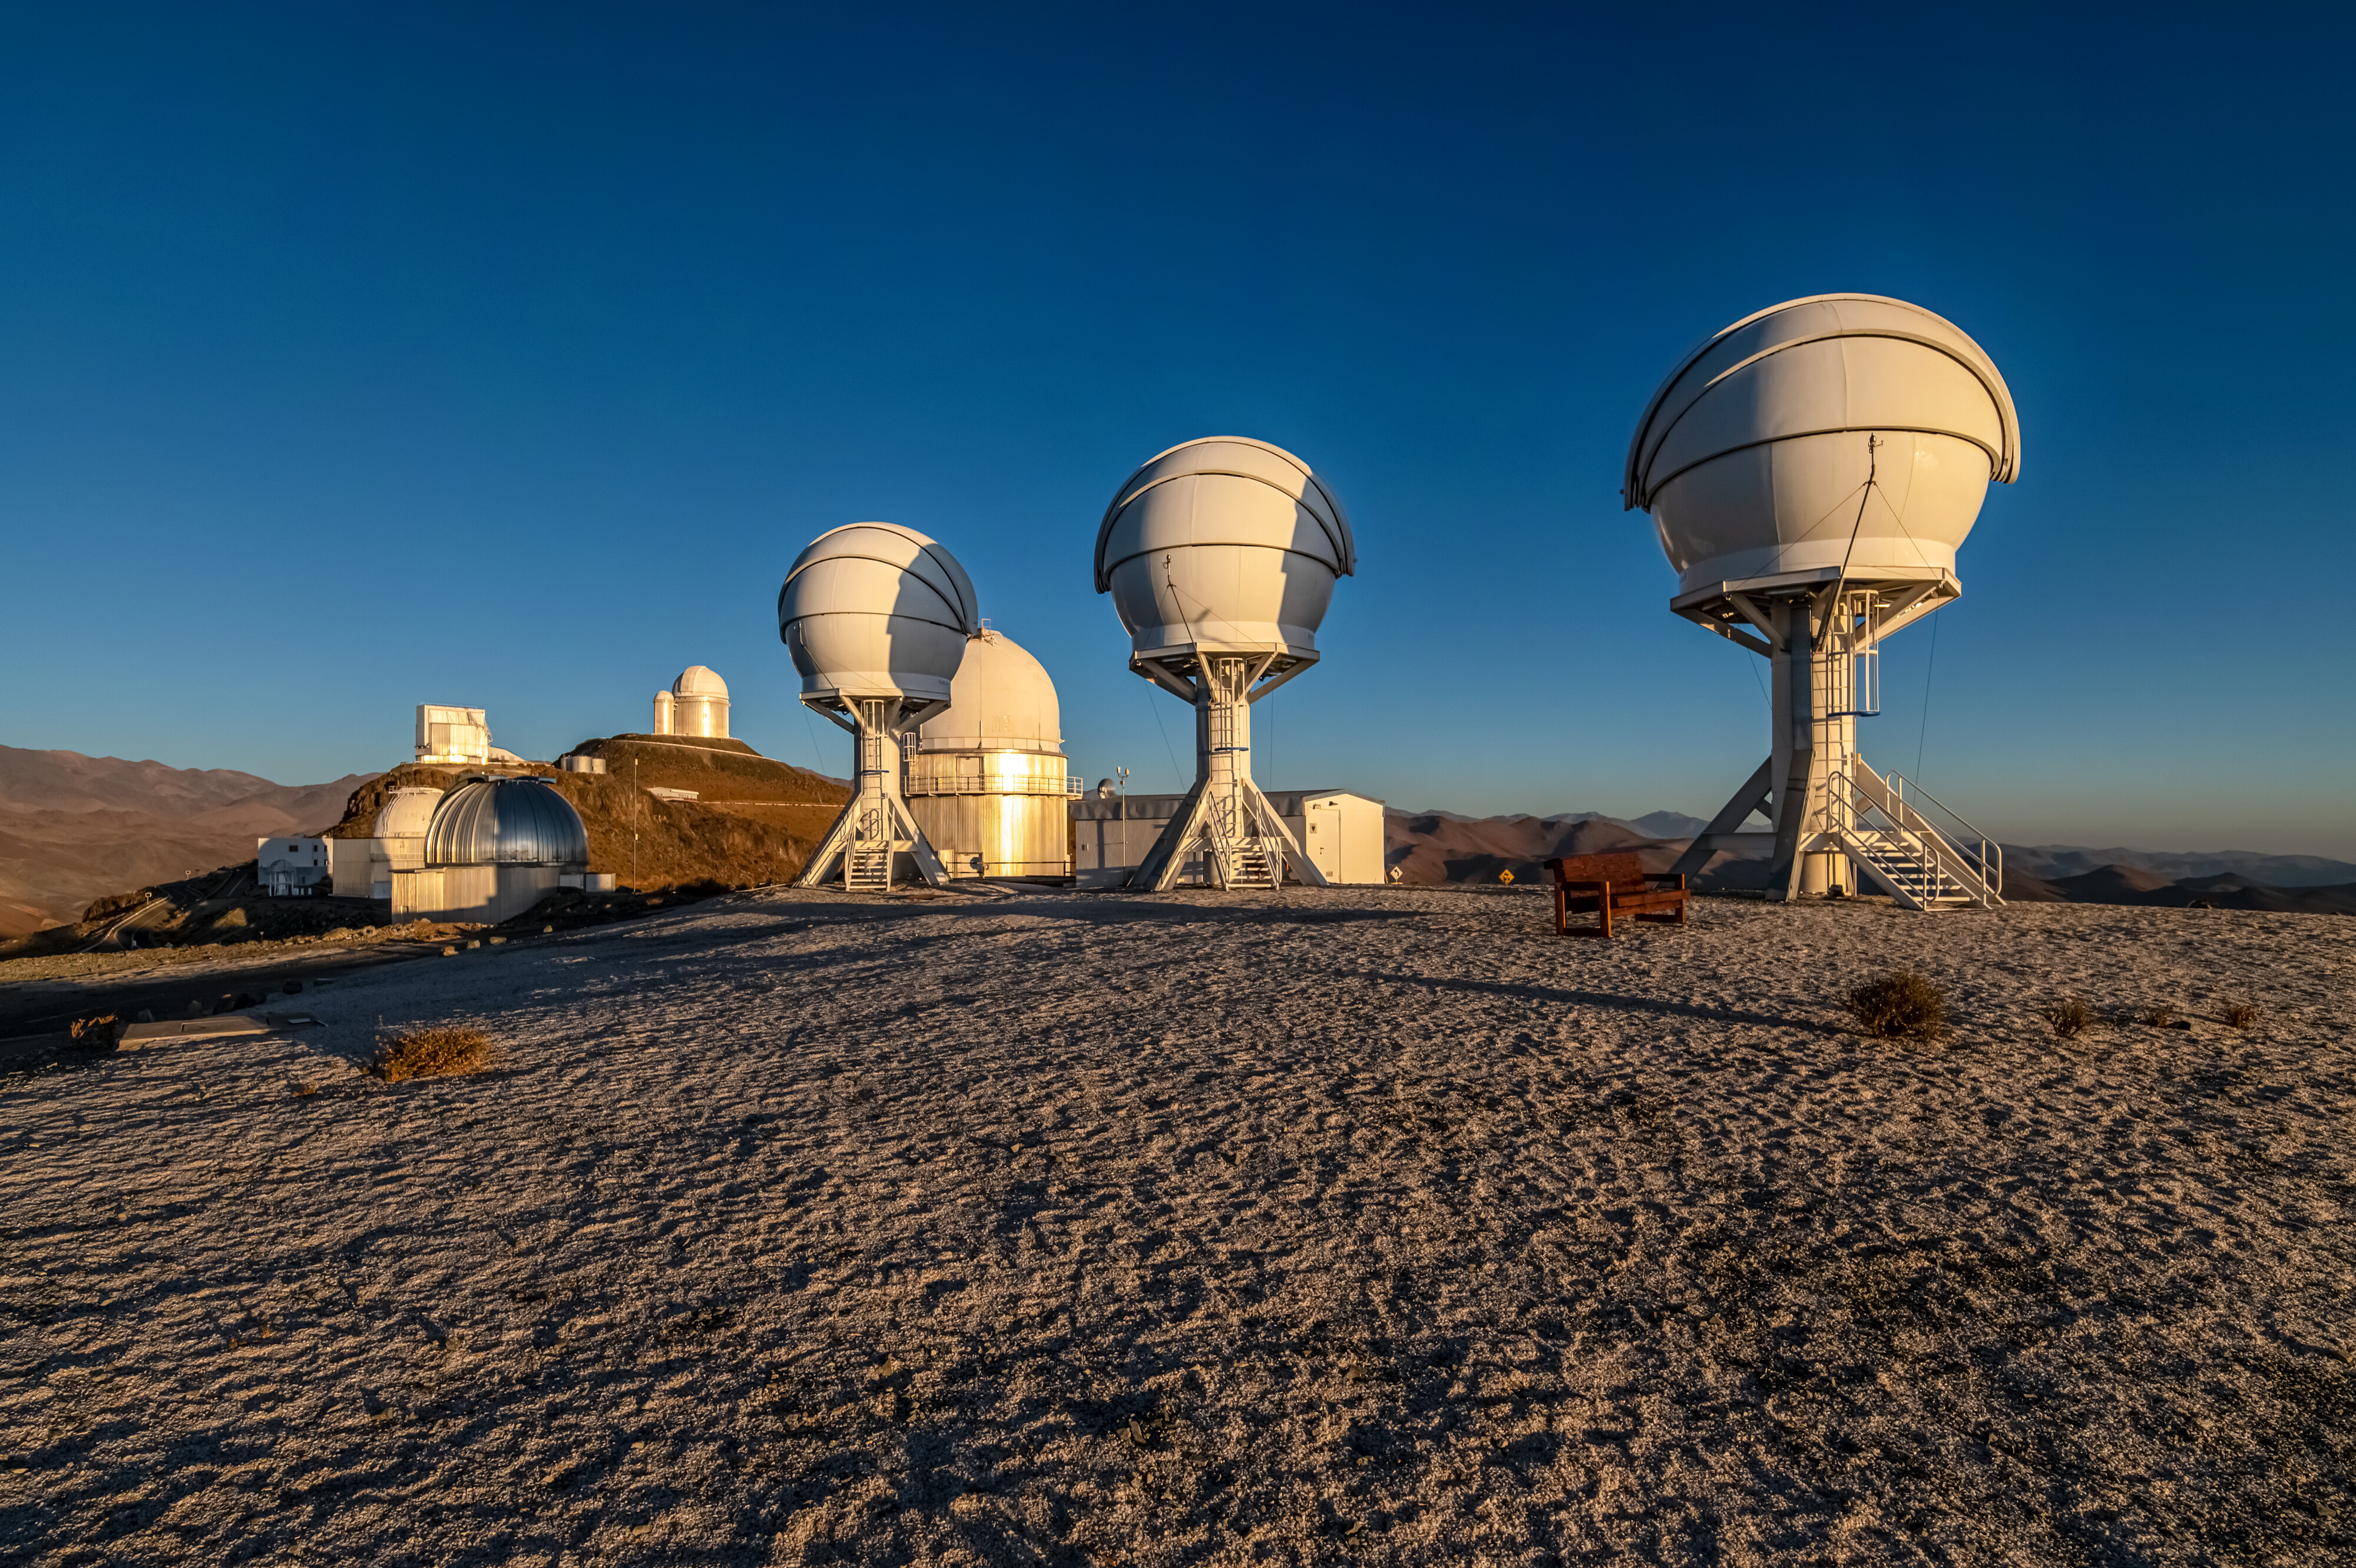 Shown in this image are the three telescopes of the BlackGEM array at ESO’s La Silla Observatory in Chile. The telescopes can quickly scan large areas of the sky to find a source that has emitted gravitational waves detected by LIGO and Virgo.